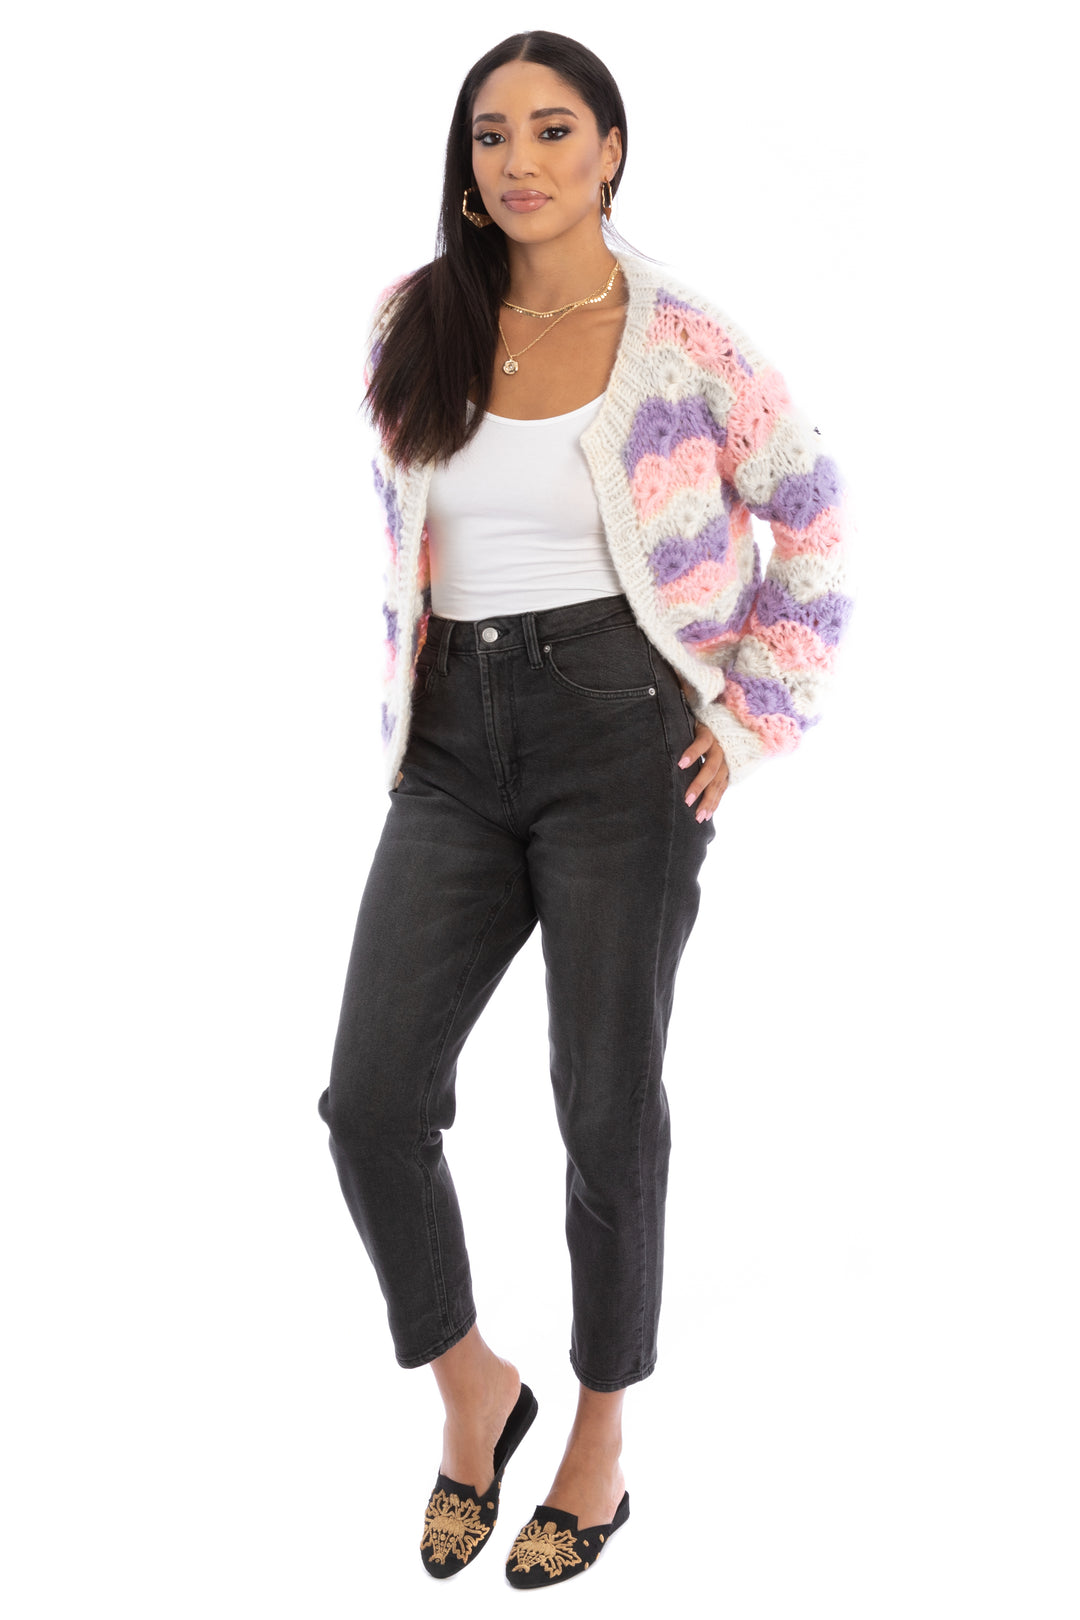 Knitted Pastel Rolling Hills Cardigan